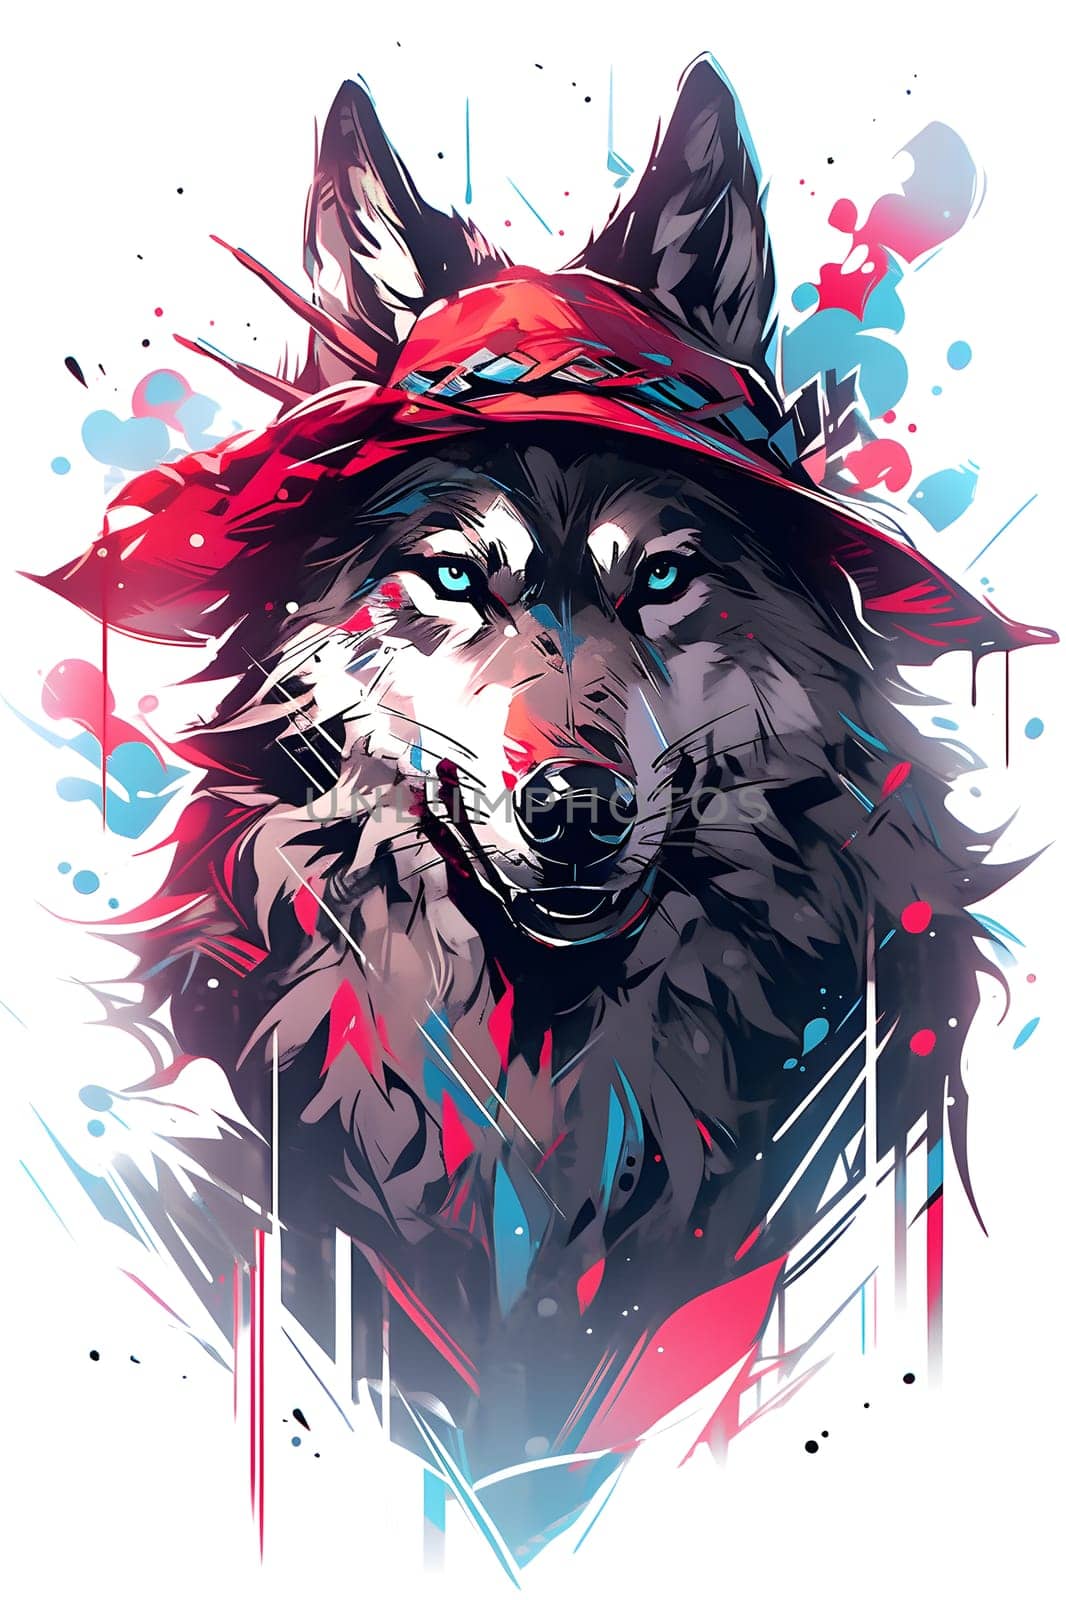 A vibrant painting of a wolf in a red hat, showcasing the artists skillful use of magenta hues to bring the furry creature to life in this stunning illustration